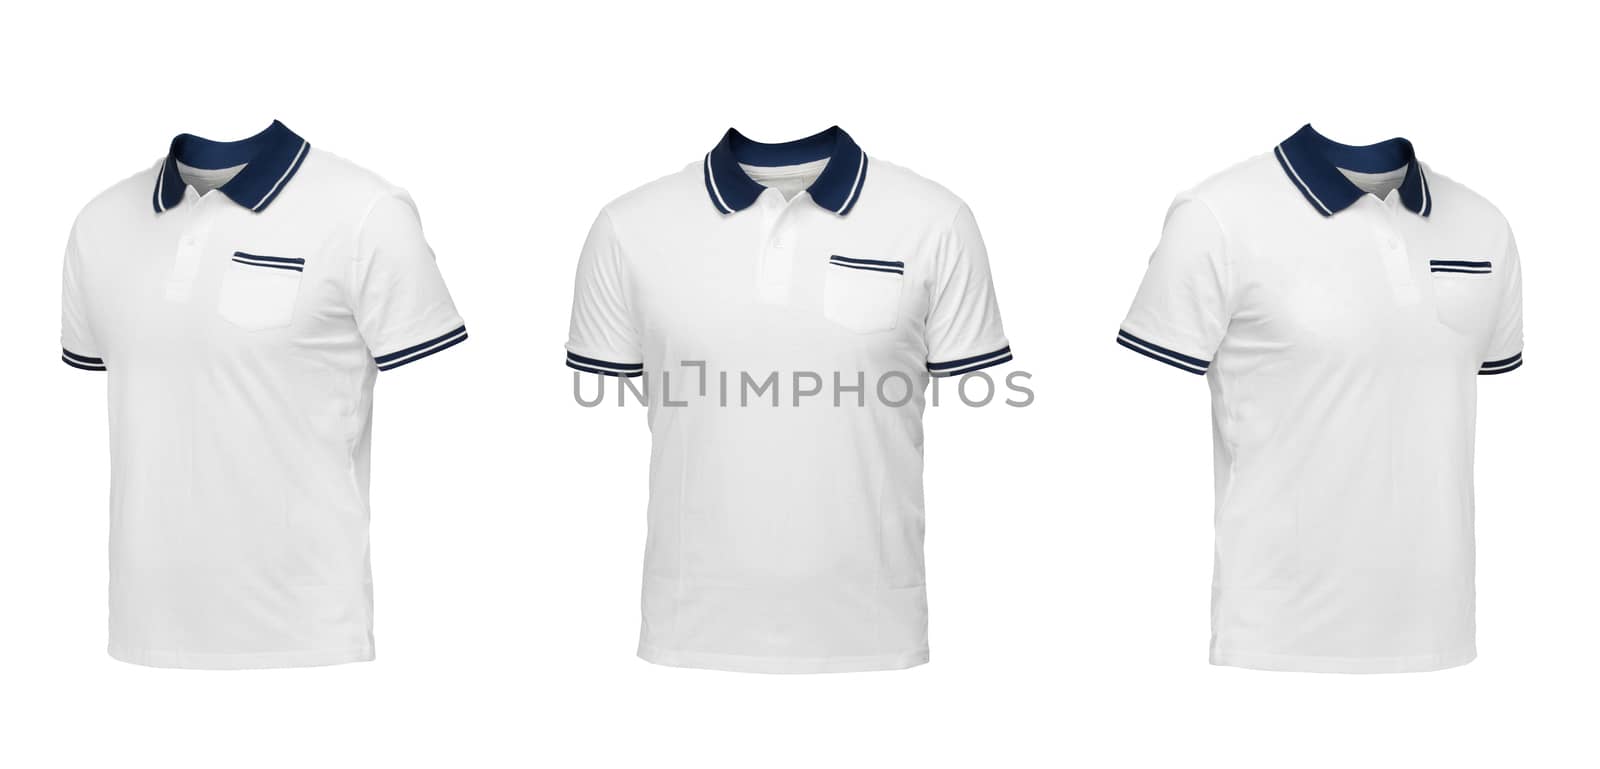 White polo shirt with a blue collar. t-shirt front view three positions on a white background